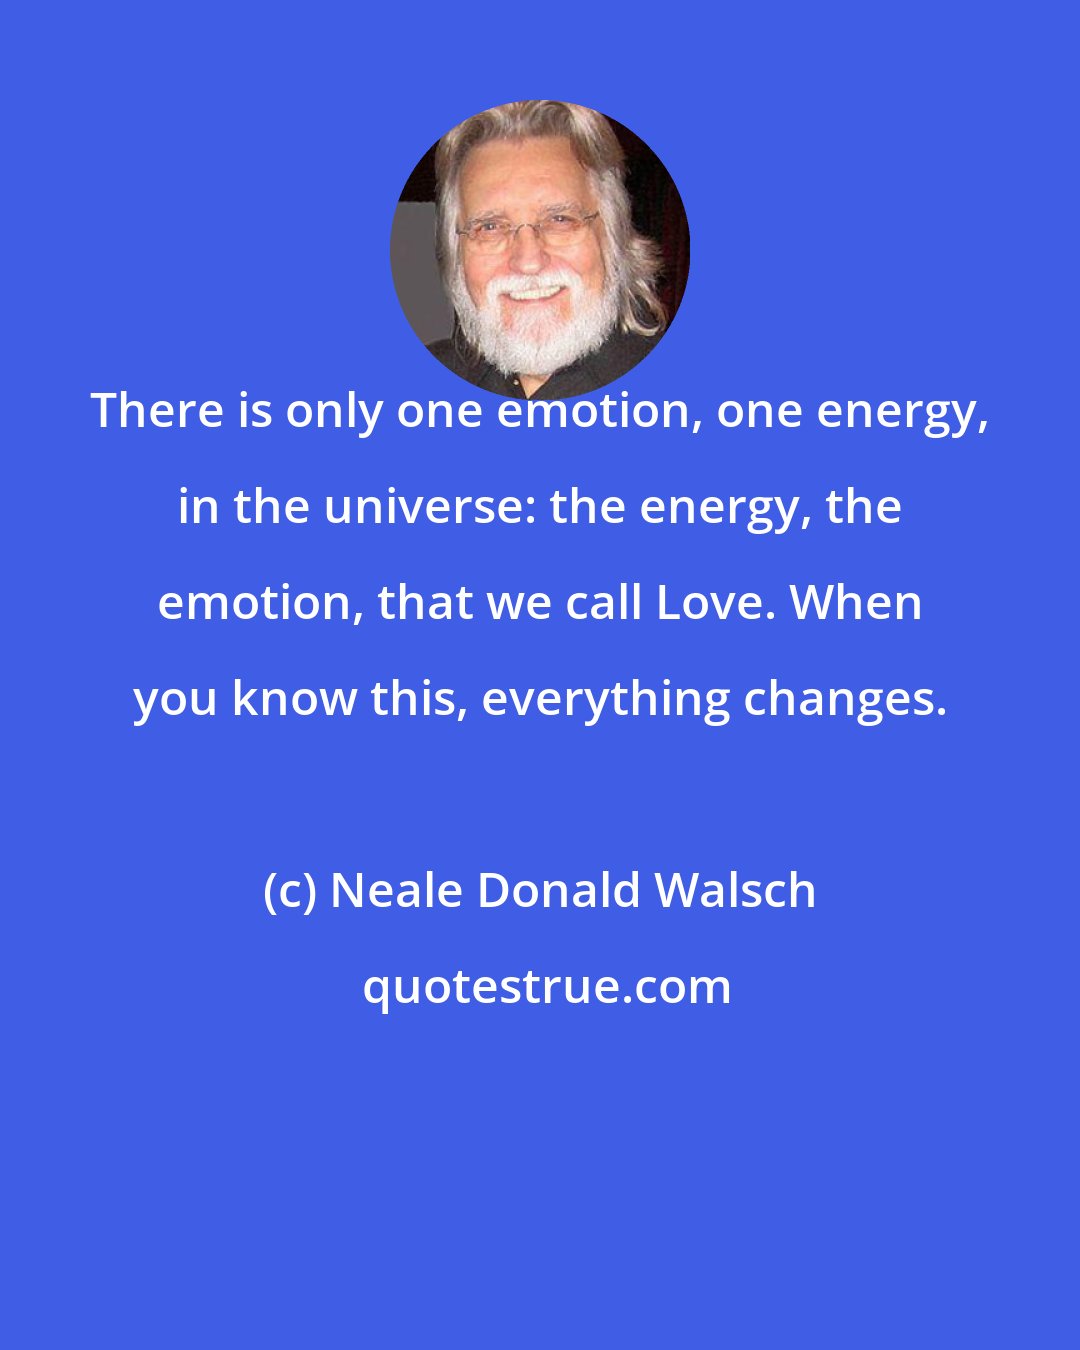 Neale Donald Walsch: There is only one emotion, one energy, in the universe: the energy, the emotion, that we call Love. When you know this, everything changes.